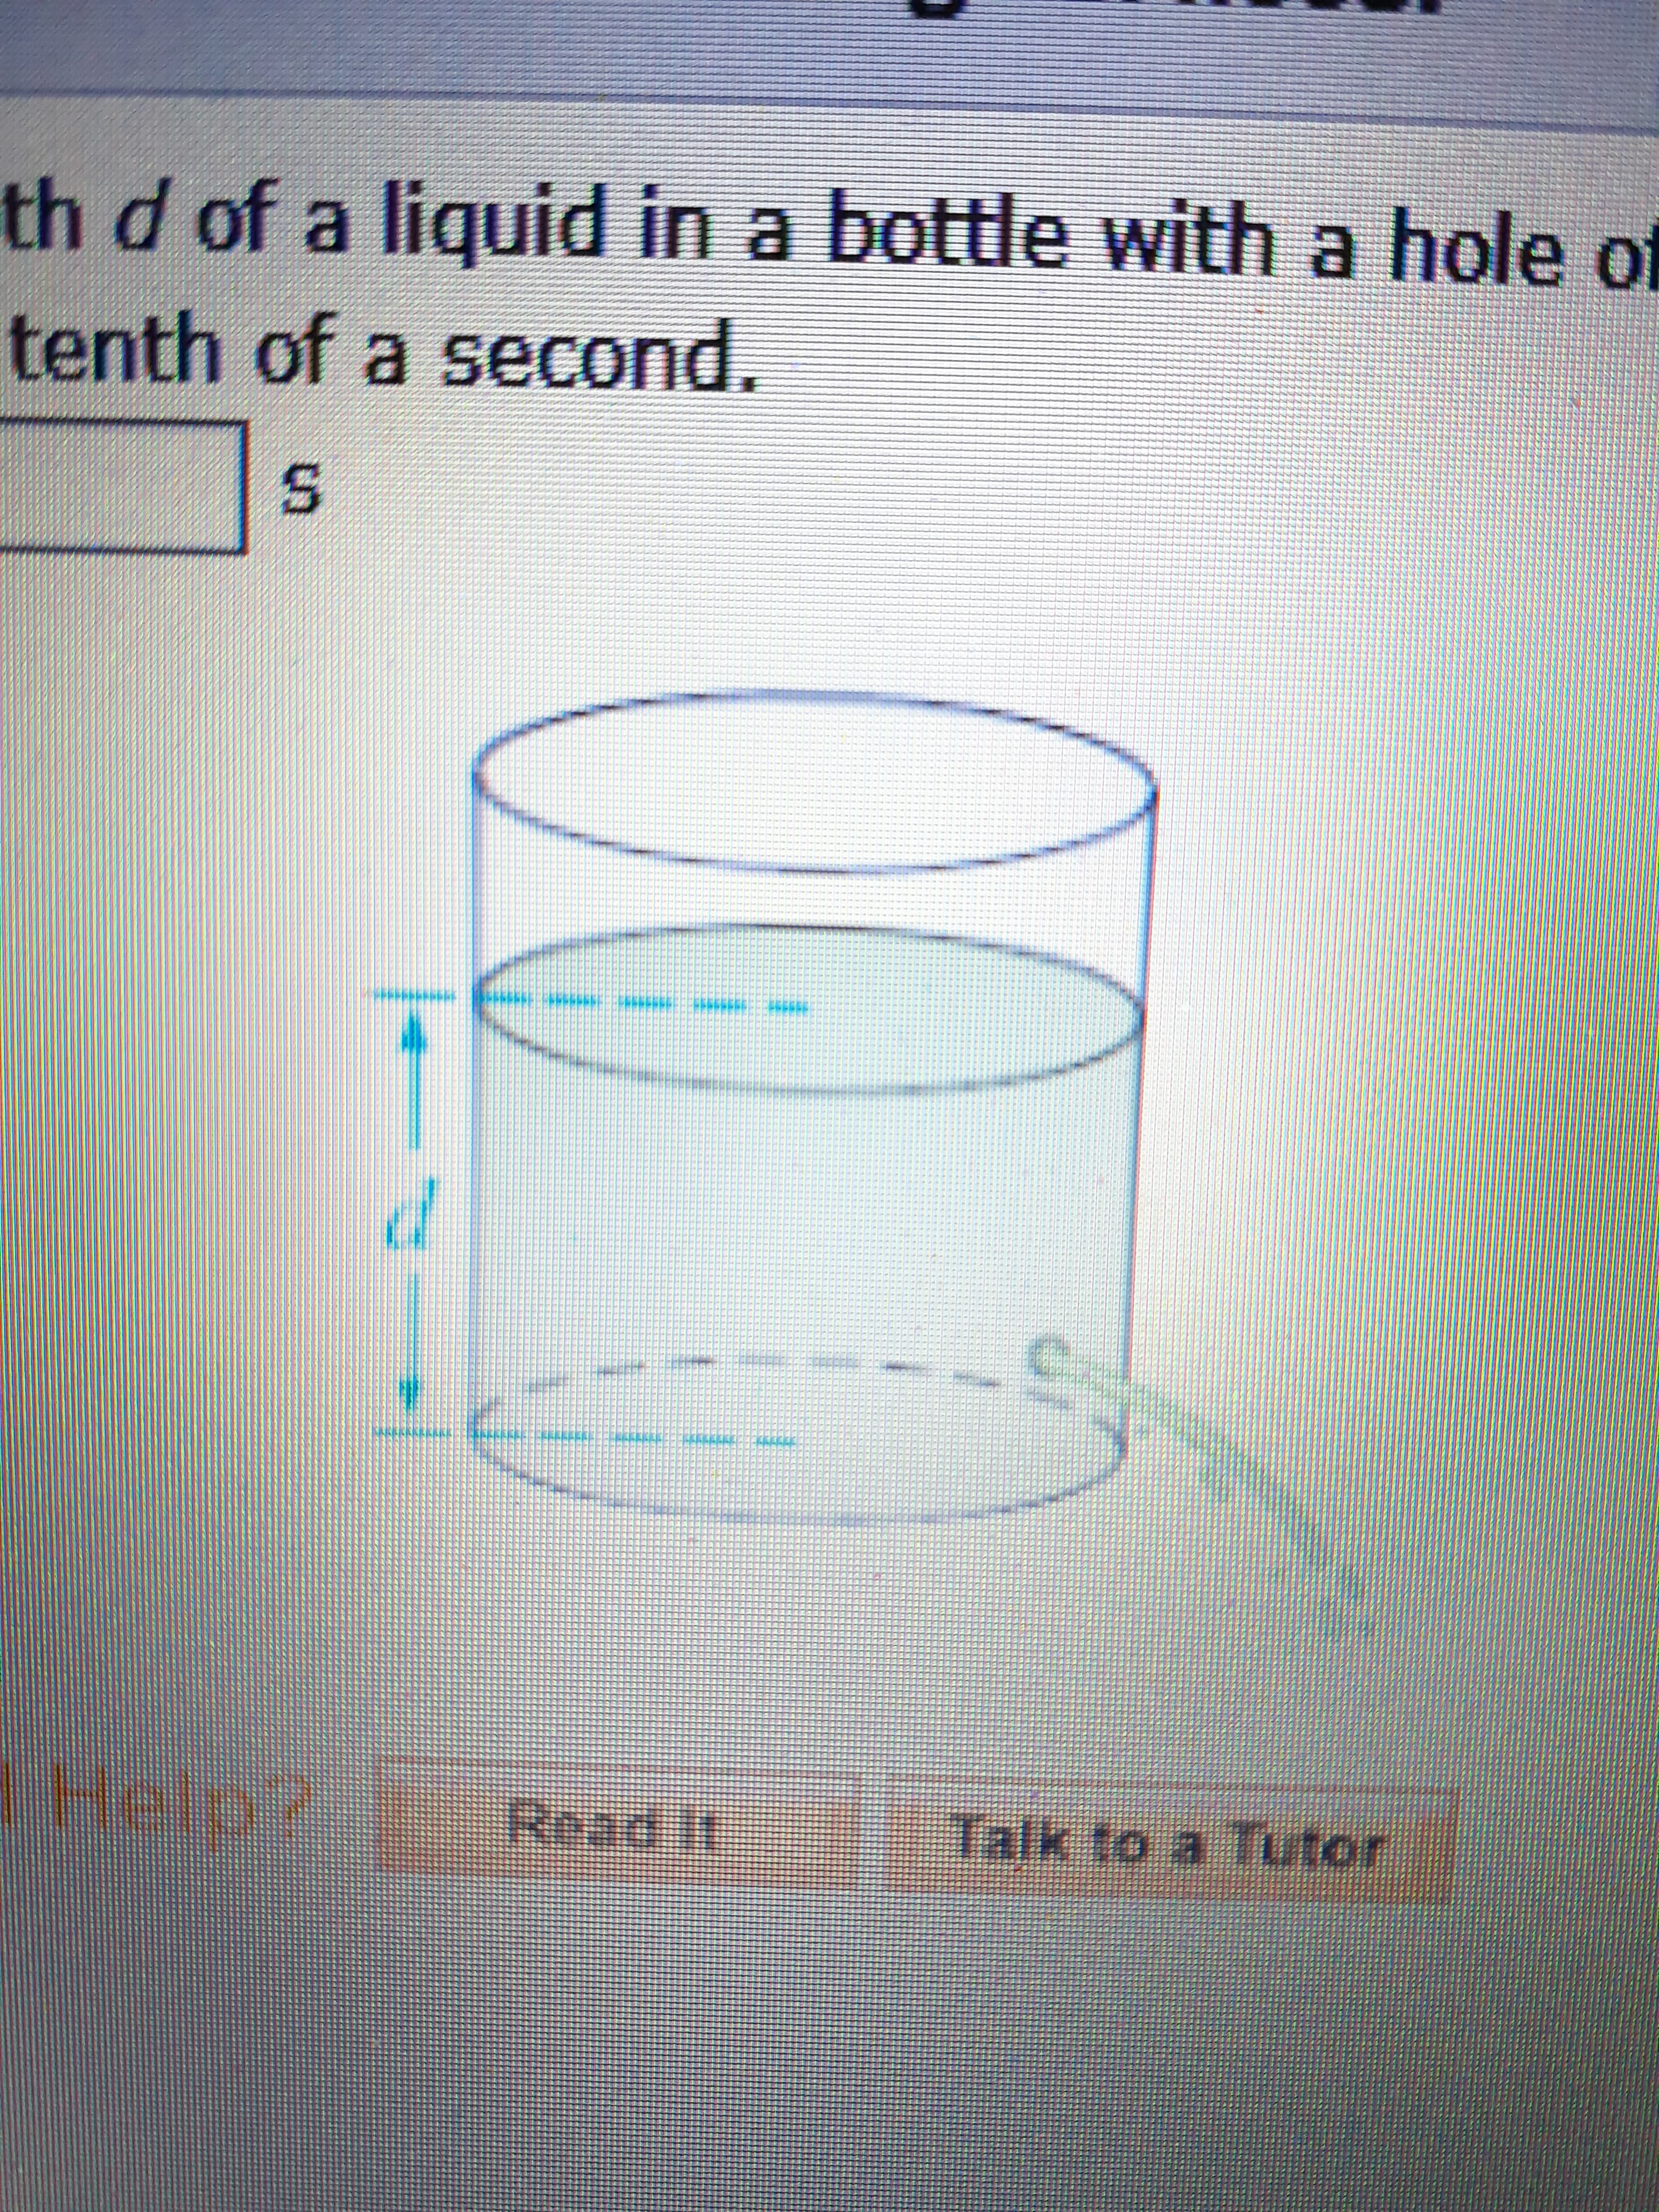 th d of a liquid in a bottle with a hole f
tenth of a second.
Help?
Read it
Talk to a Tutor
